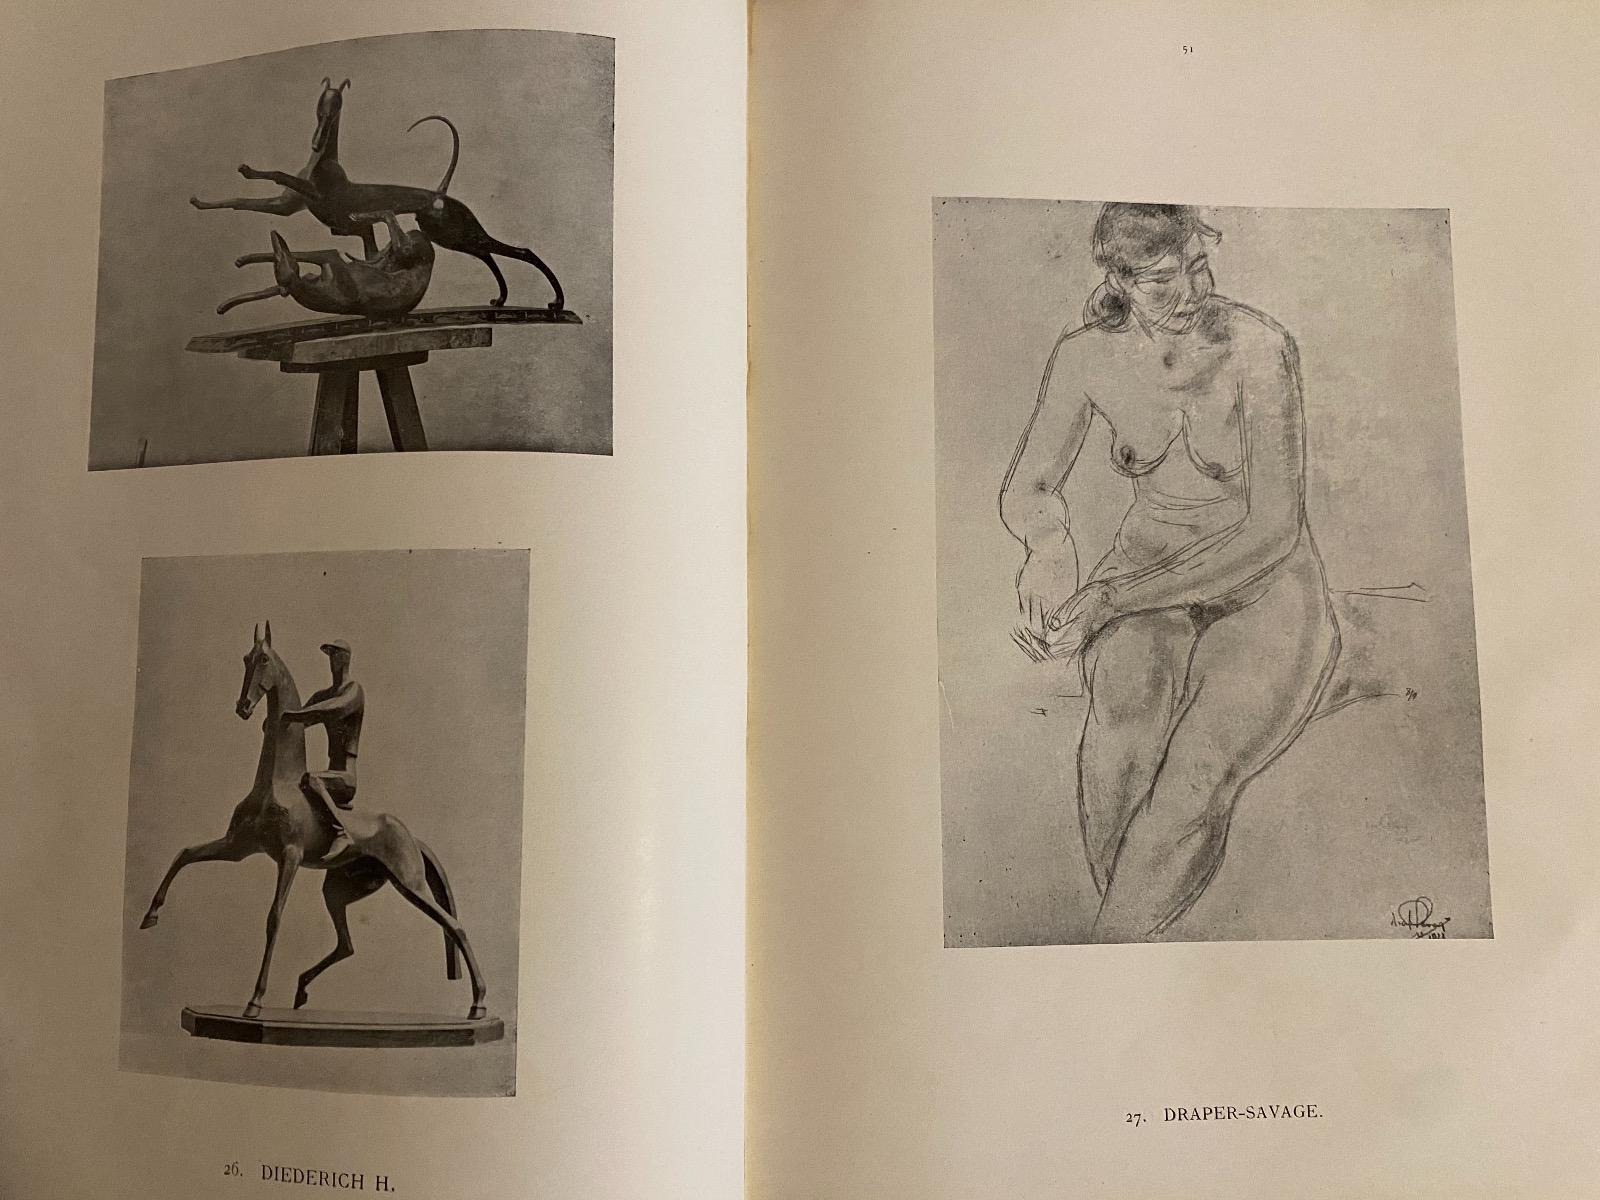  Artistes Américains Modernes de Paris, vintage catalogue printed in 1932.

Vol in folio, pp. 138, cm 32 x 1 x 25, In French. 

Catalogue of the 